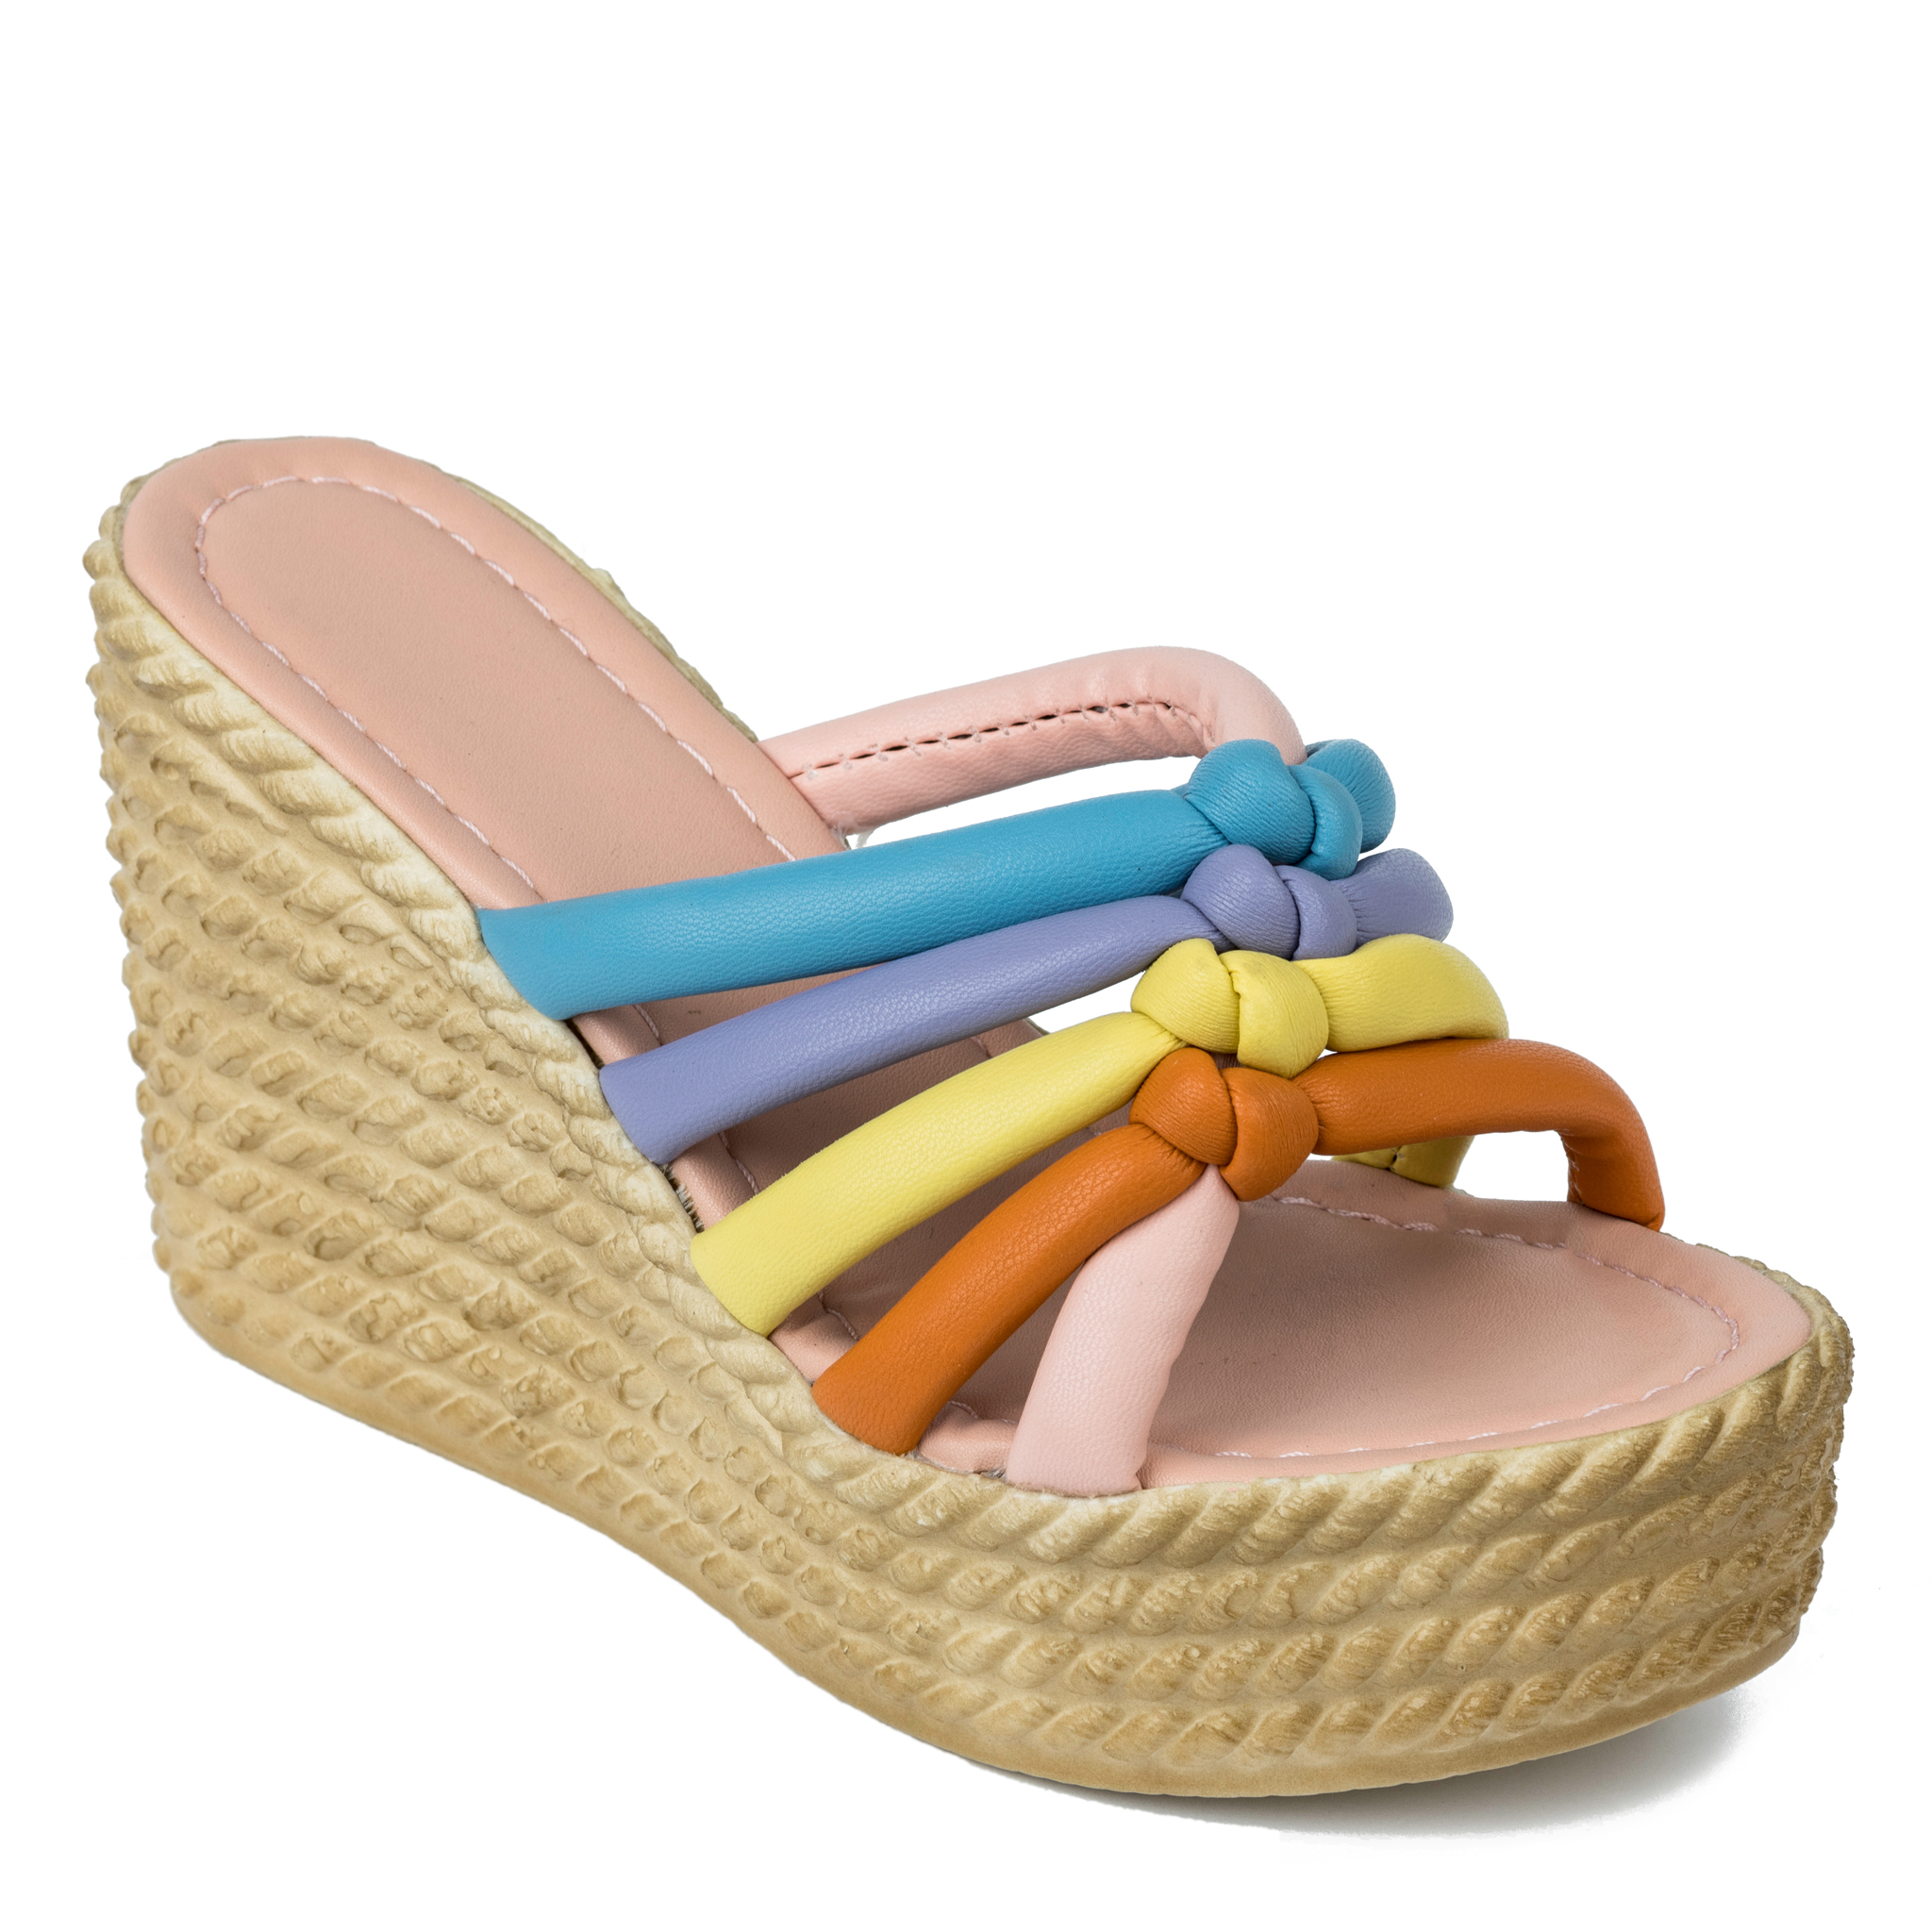 COLOURFUL WEDGE SLIPPERS 